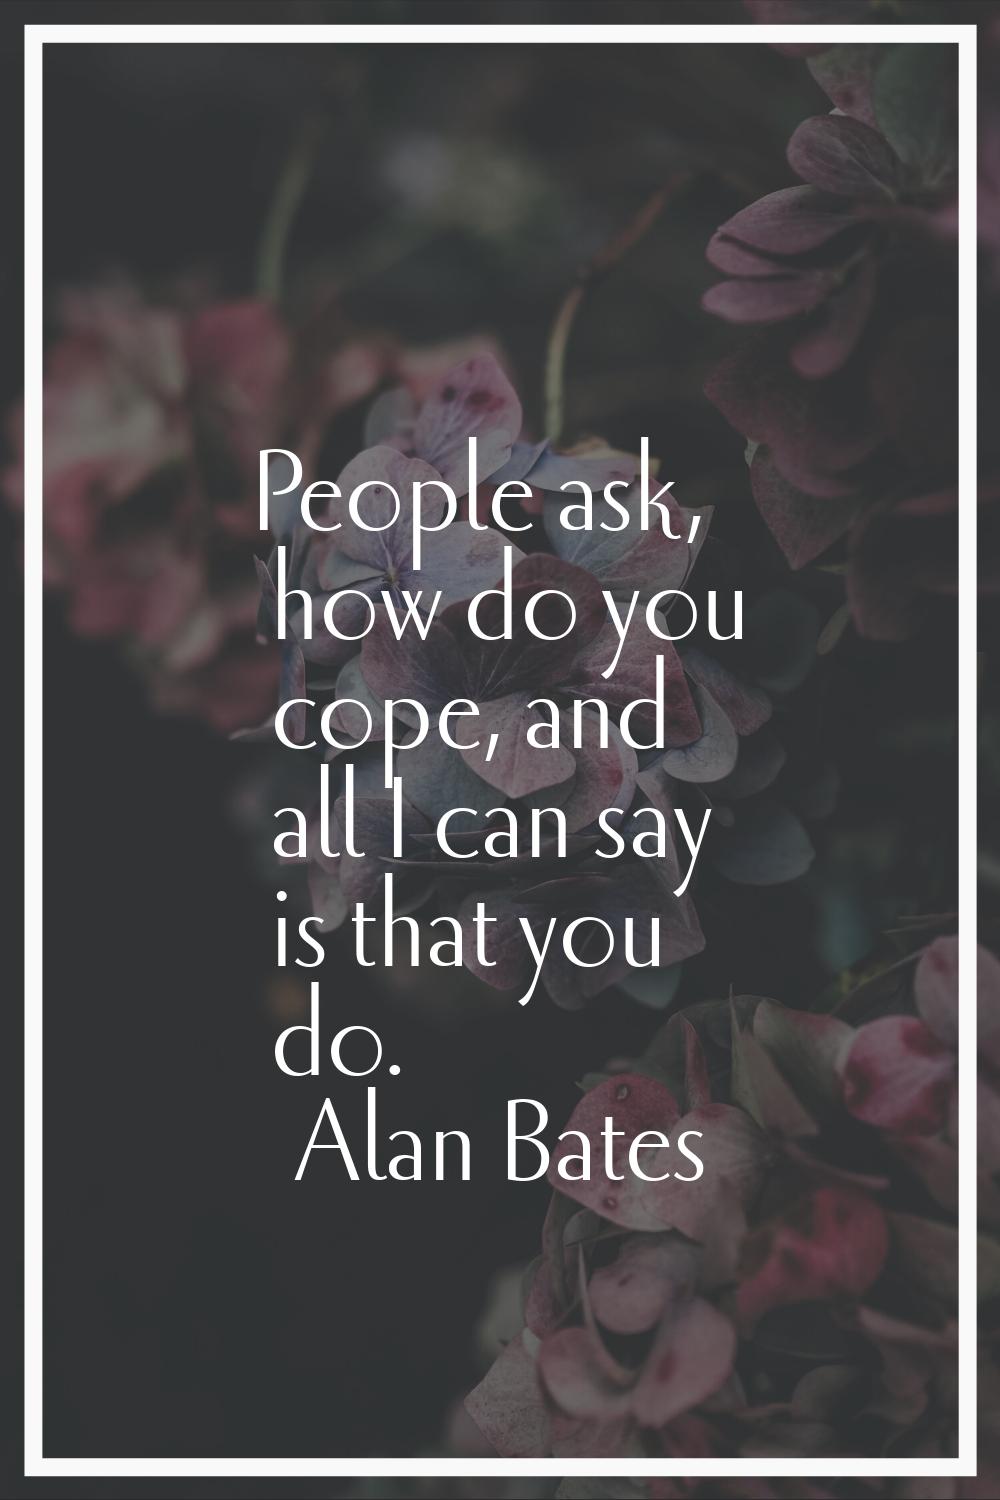 People ask, how do you cope, and all I can say is that you do.